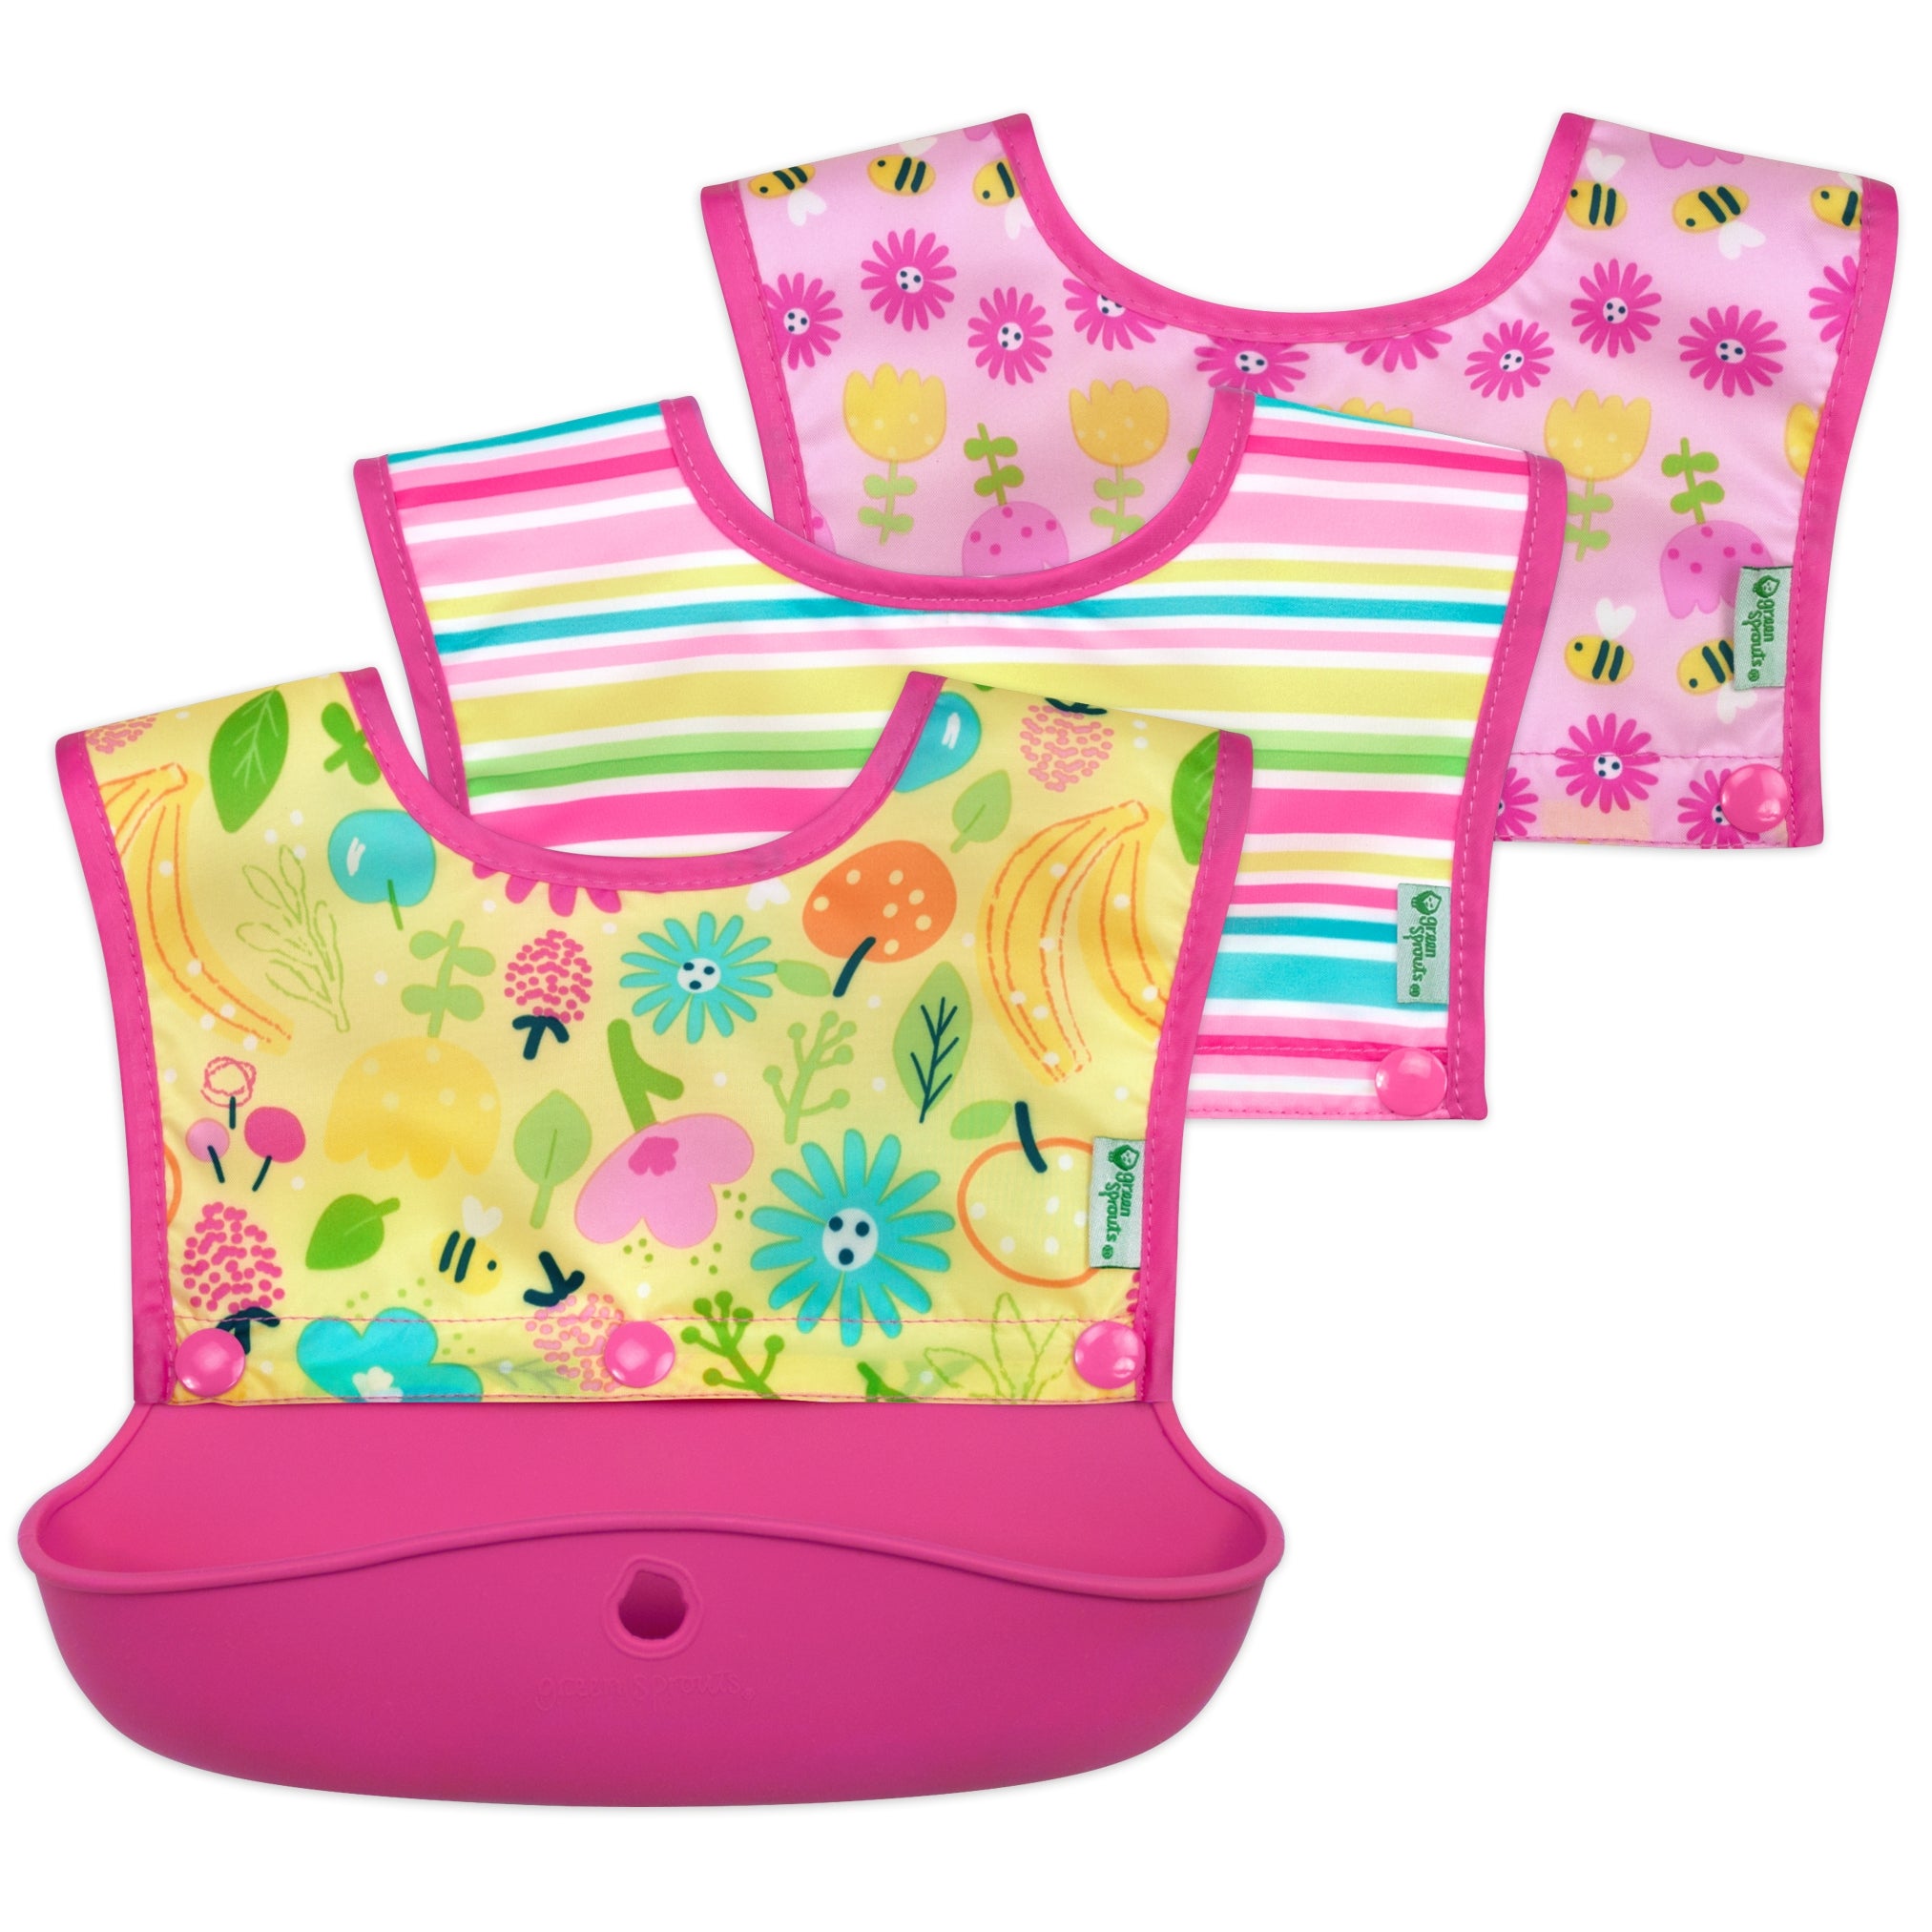 Snap & Go Silicone Food Catcher Bib - (3-in-1 set) - Pink Bee Floral - HoneyBug 